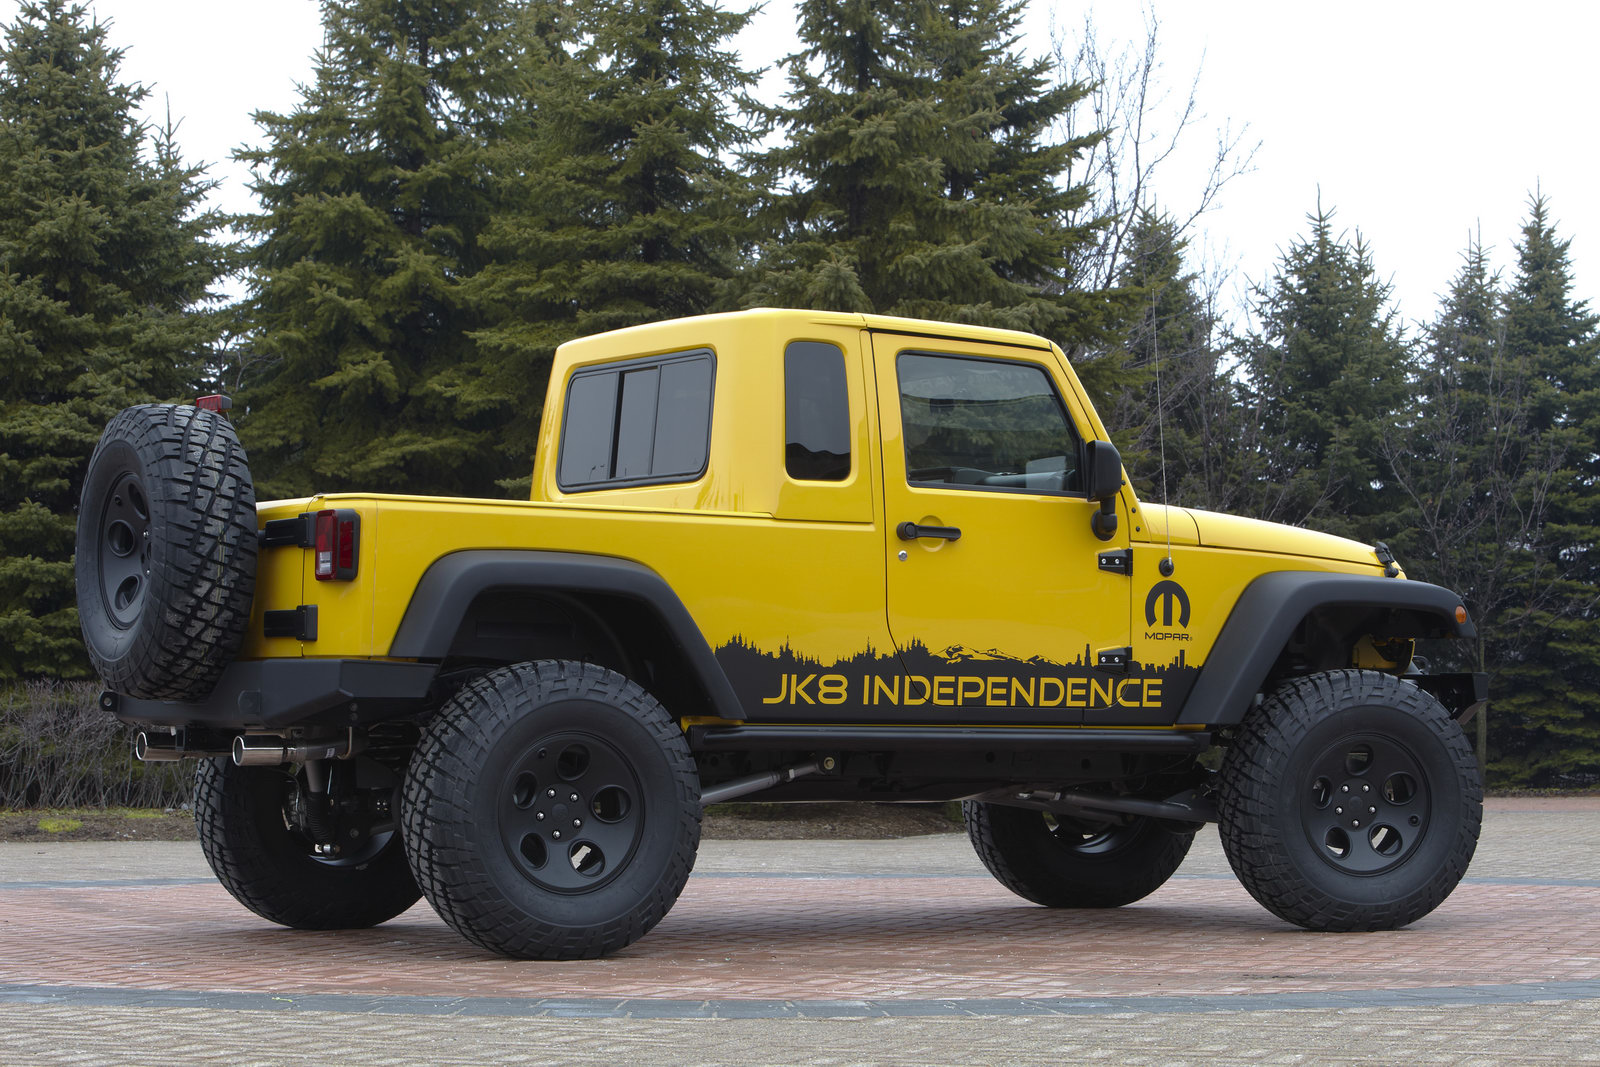 Jeep Wrangler JK-8 Independence: DIY Mopar Kit Allows Owners To Turn  Wrangler Into a Pick Up Truck | Carscoops